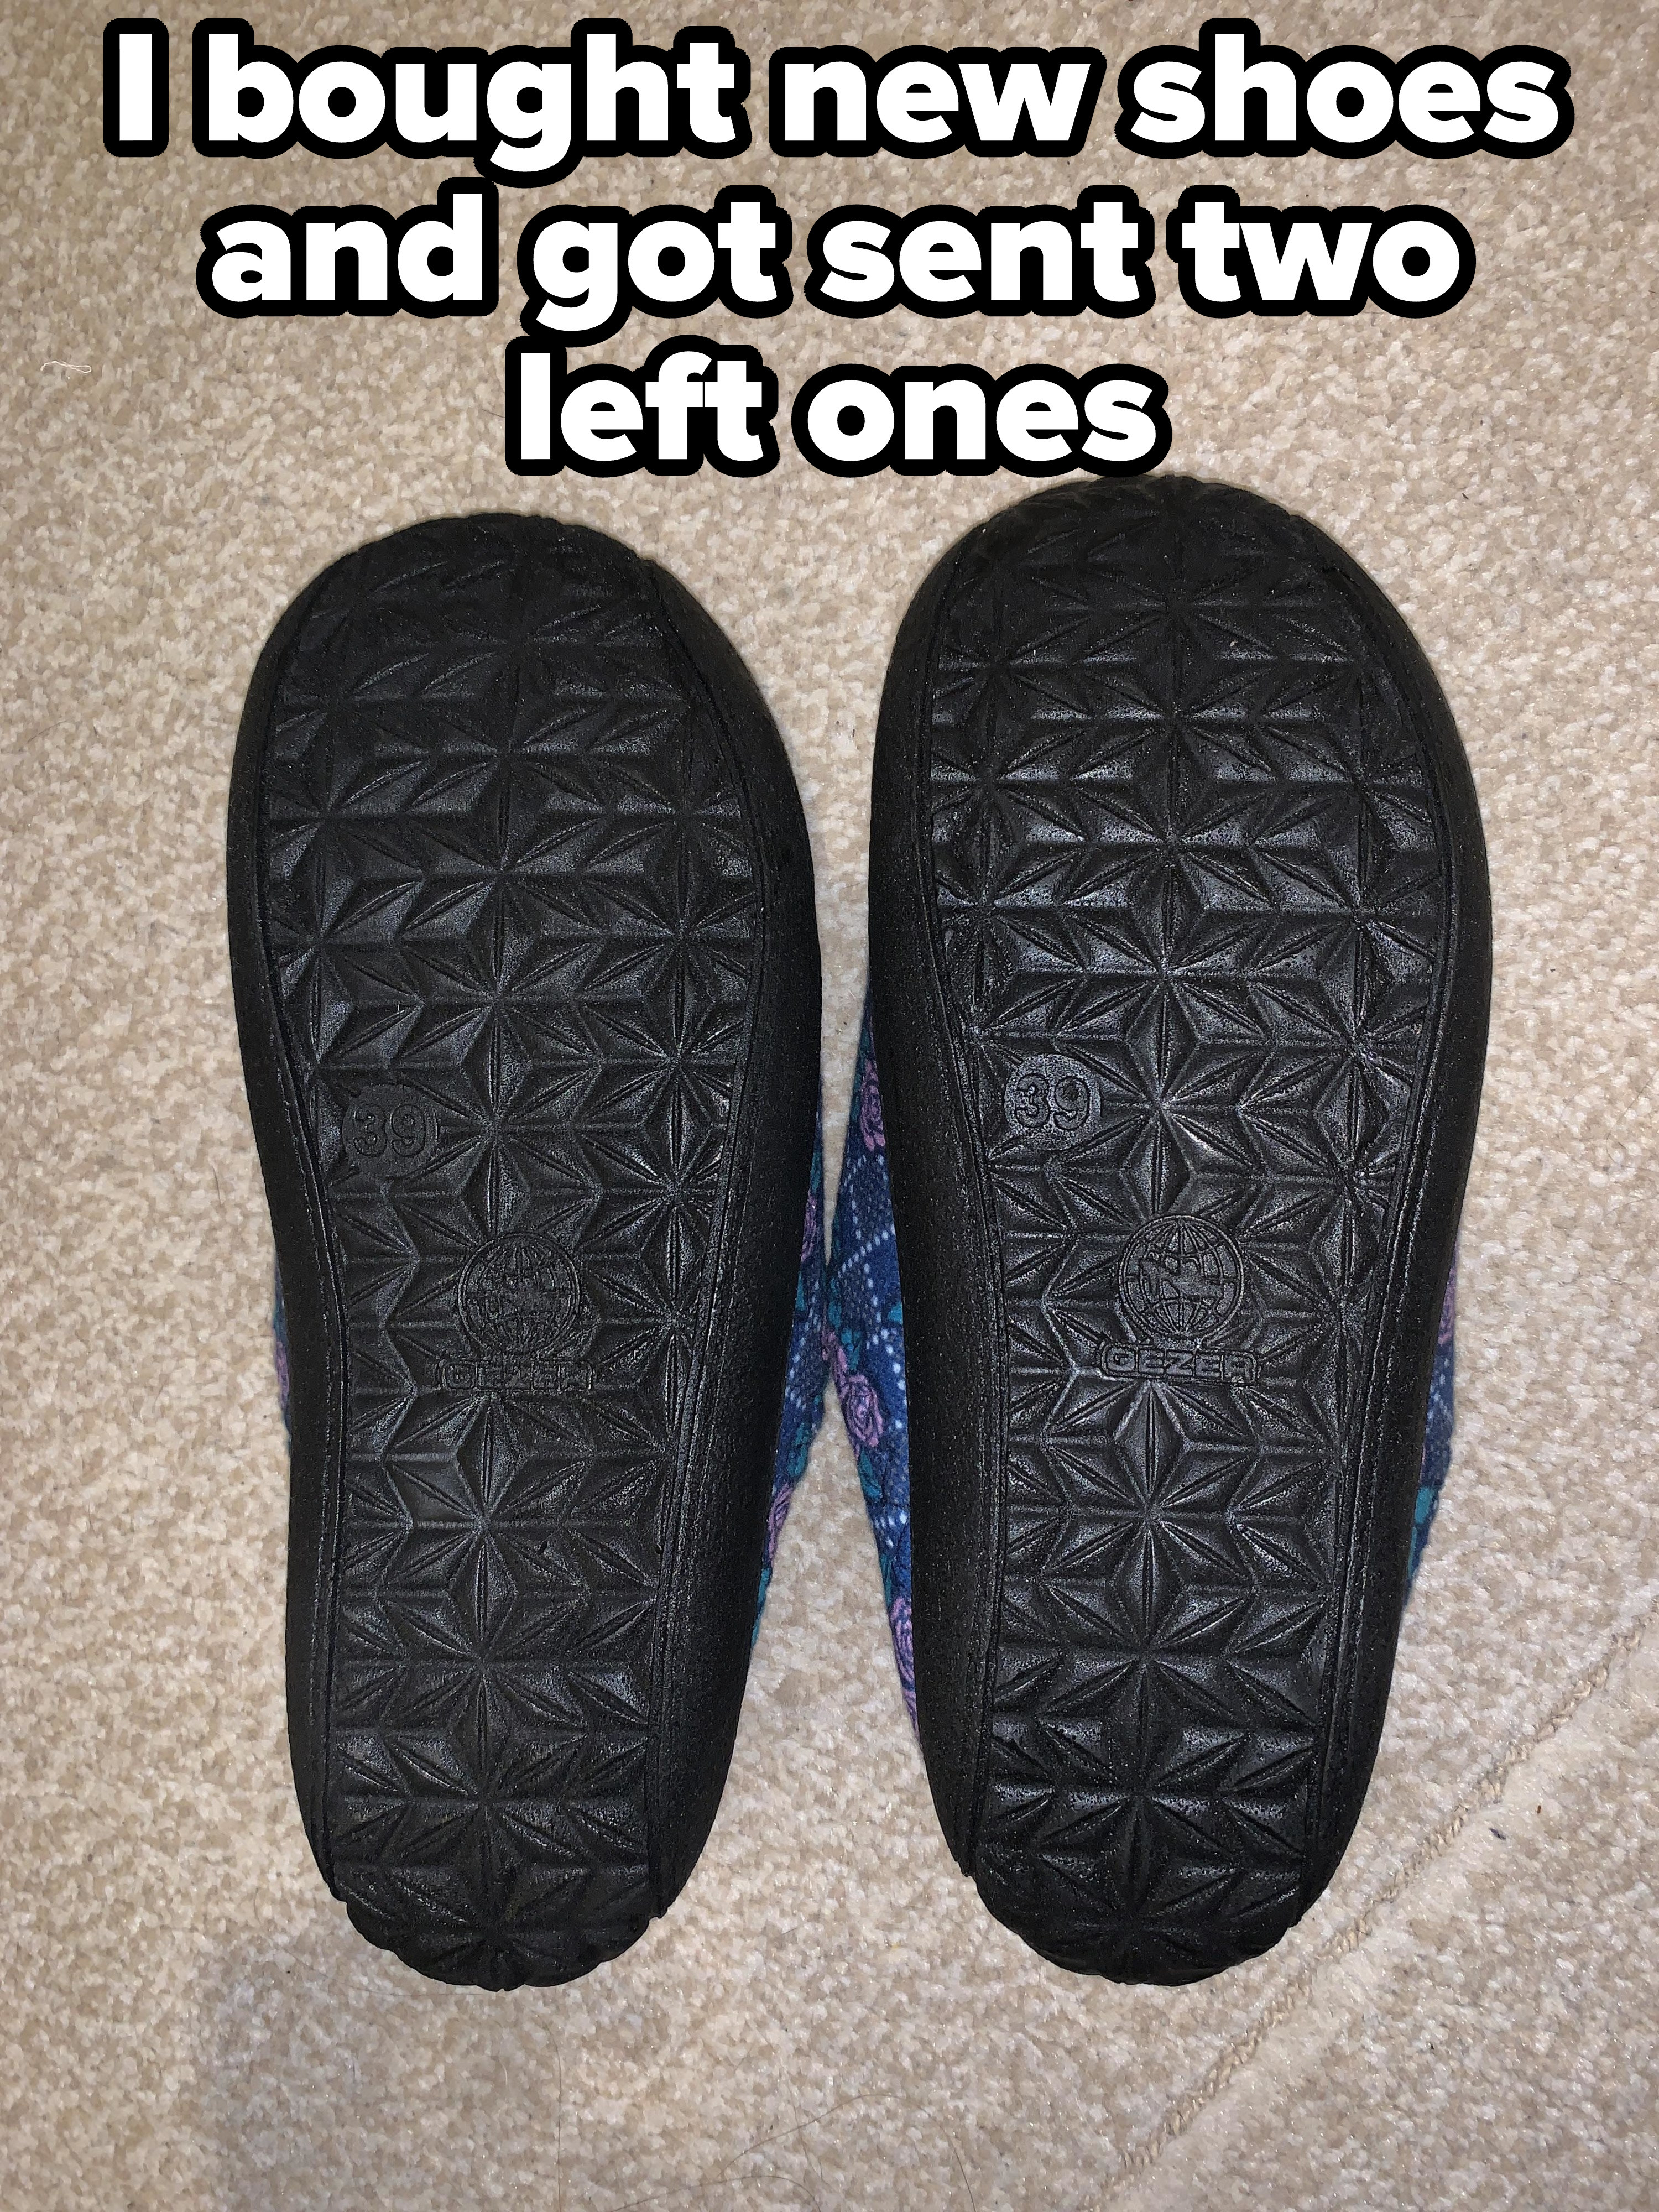 Two left shoes